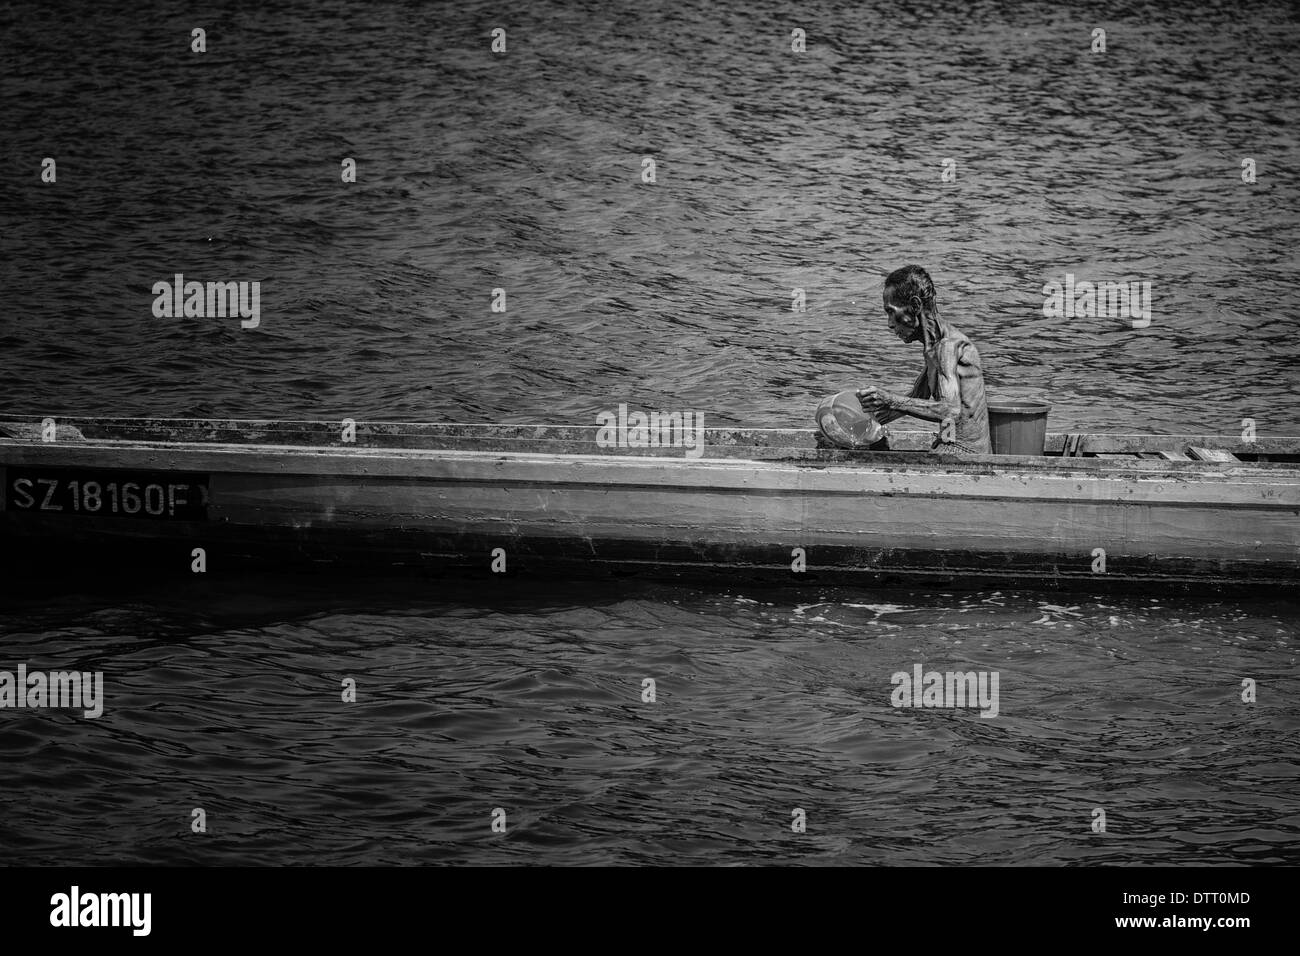 Black and White photo of a fisherman bailing water from his traditional sampan at St. John's Island, Singapore Stock Photo